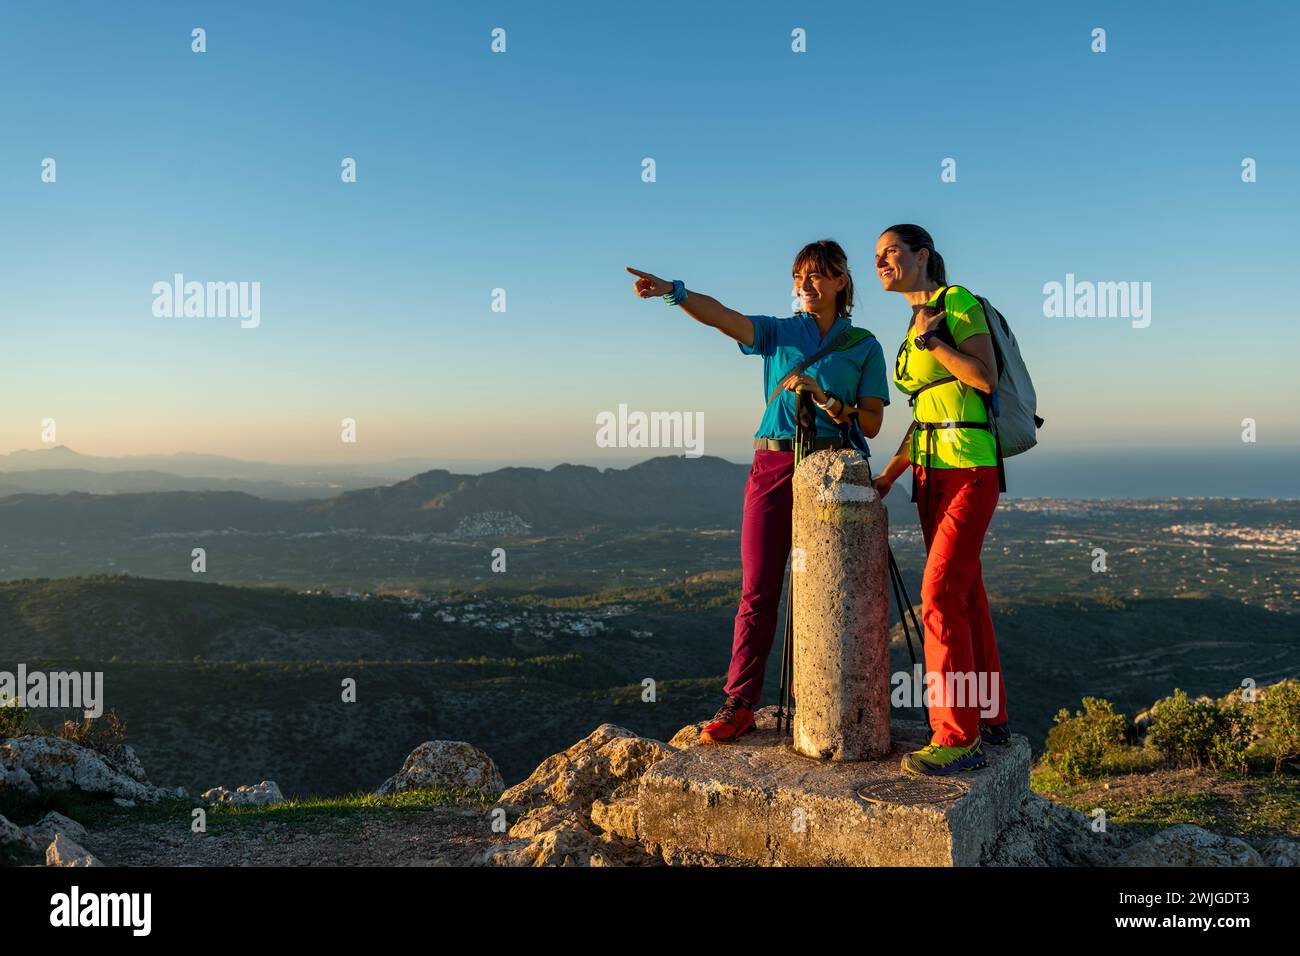 Two women hikers enjoying the beautiful nature from high above, Lliber, Alicante, Costa Blanca, Spain - stock photo Stock Photo